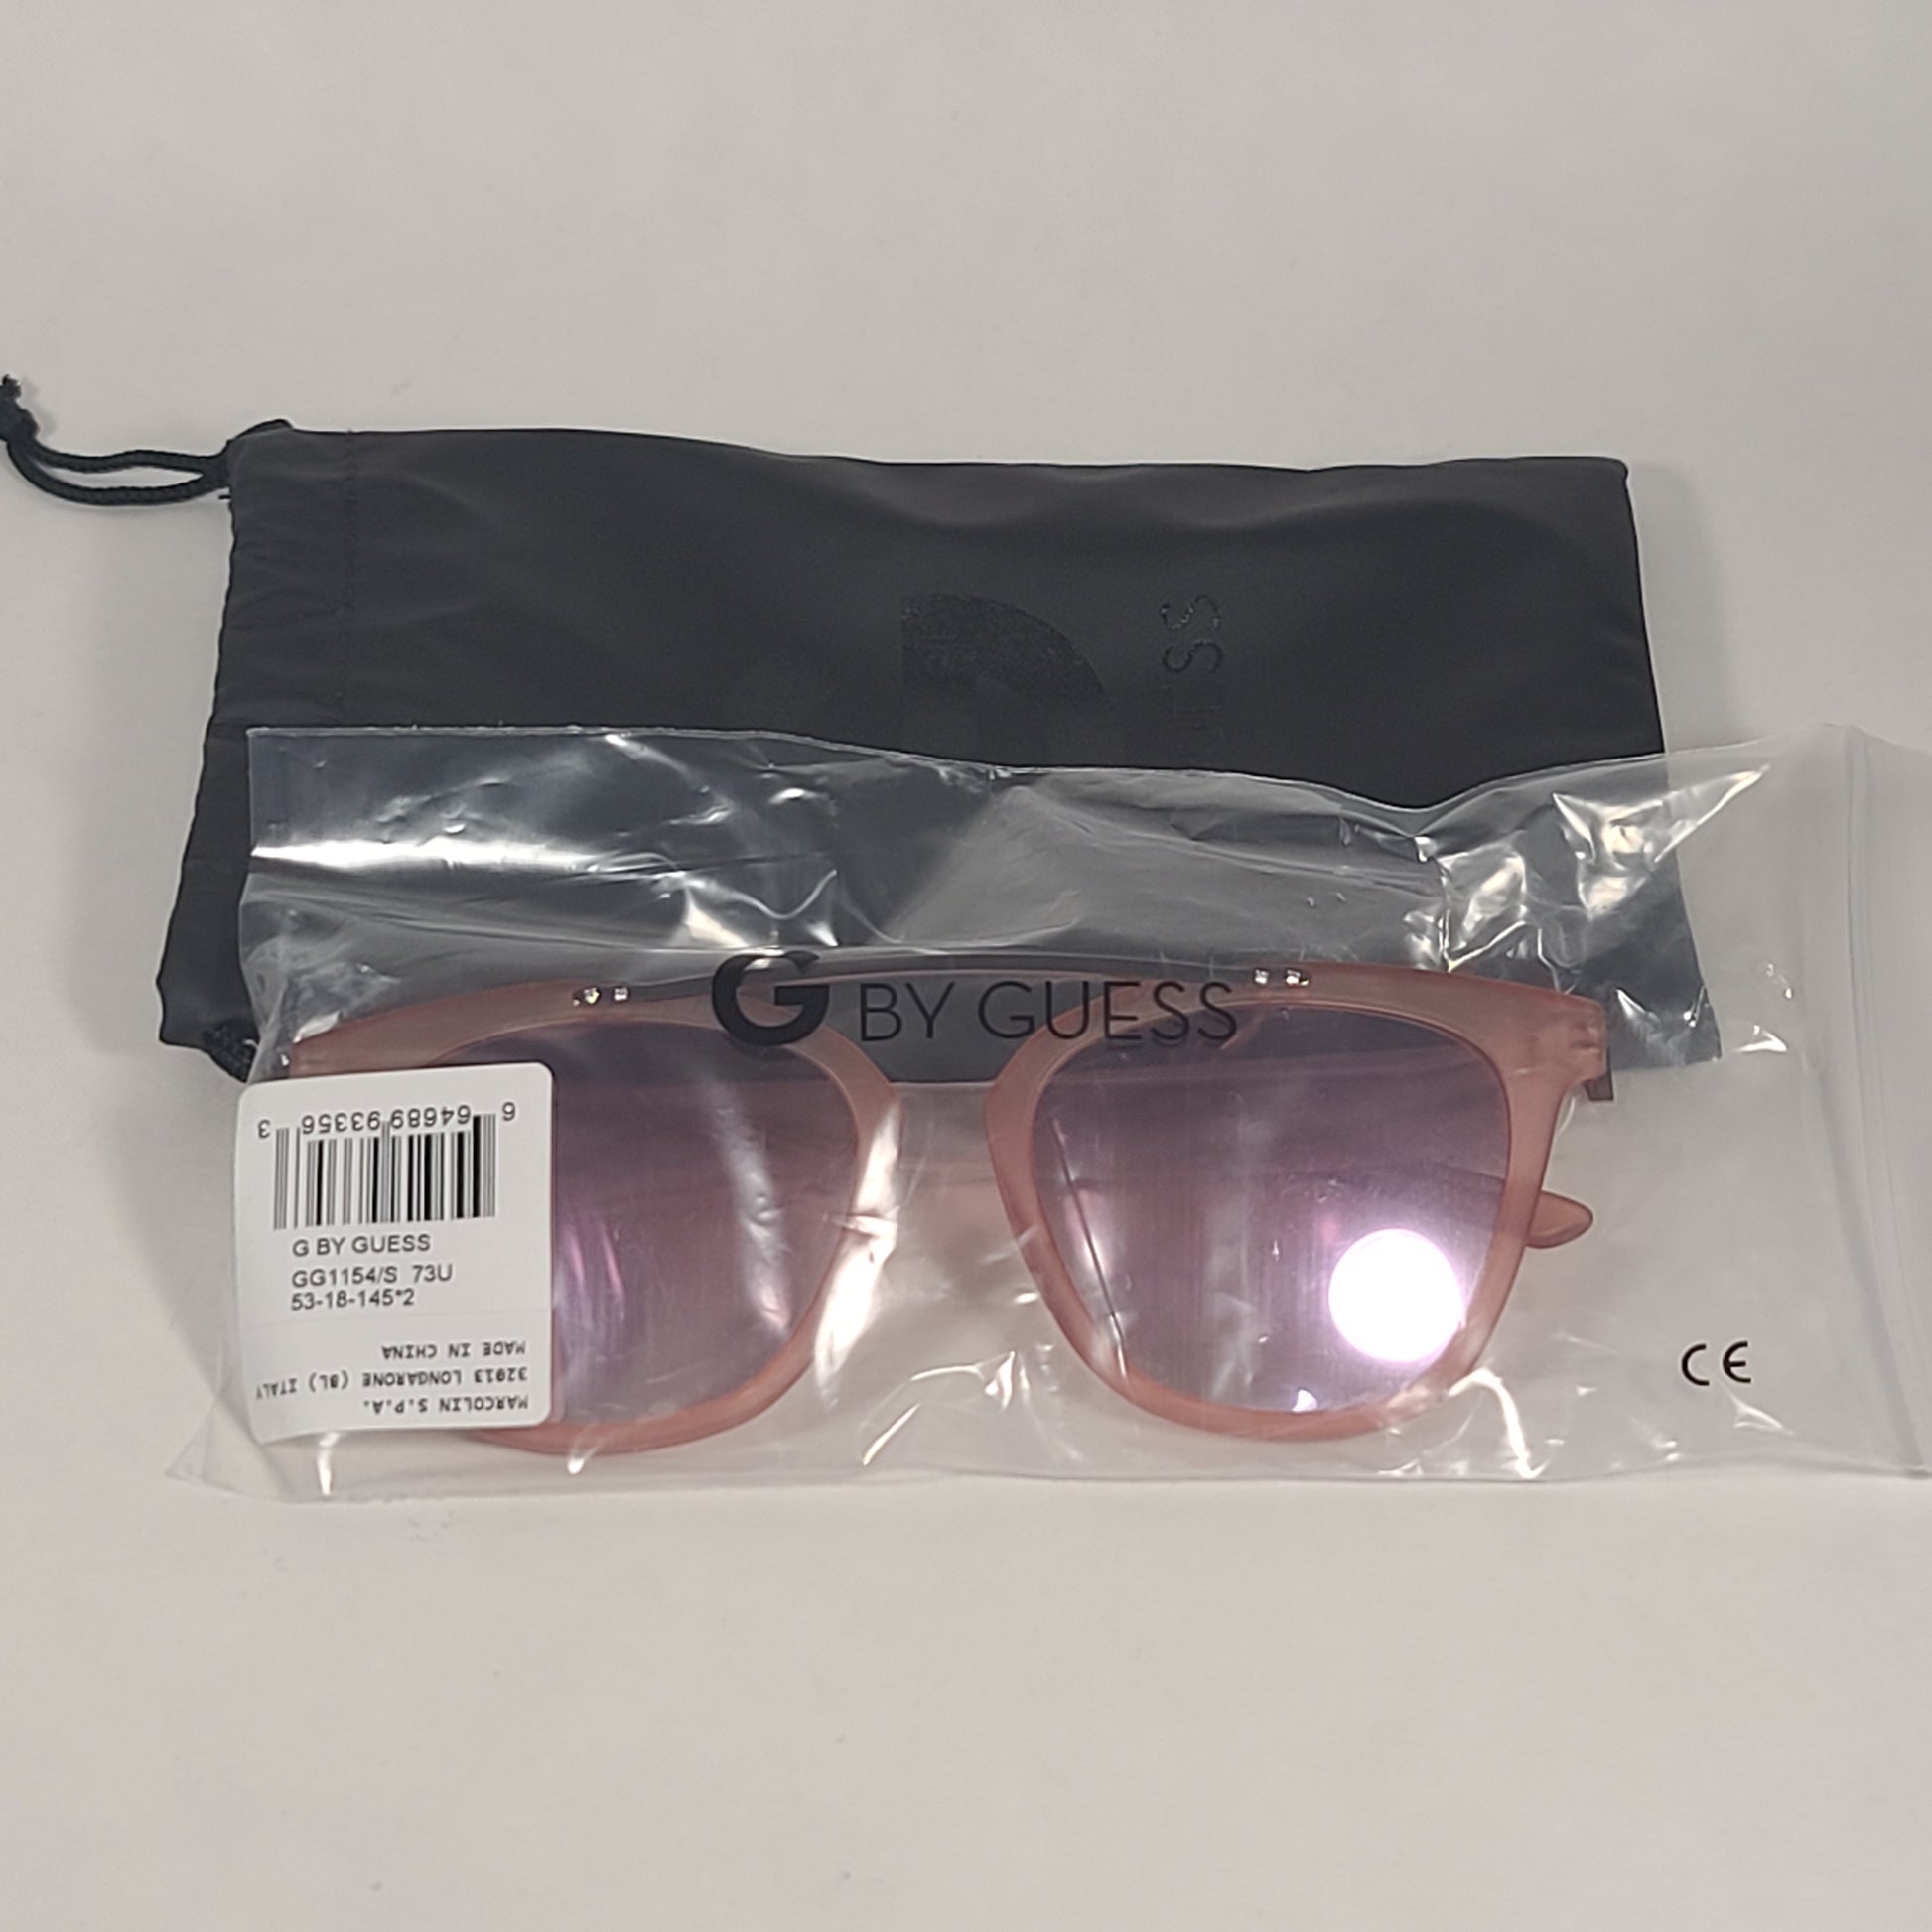 G By Guess Sunglasses Rose Gold And Pink Frame Pink Mirror Lens GG1154 73U - Sunglasses